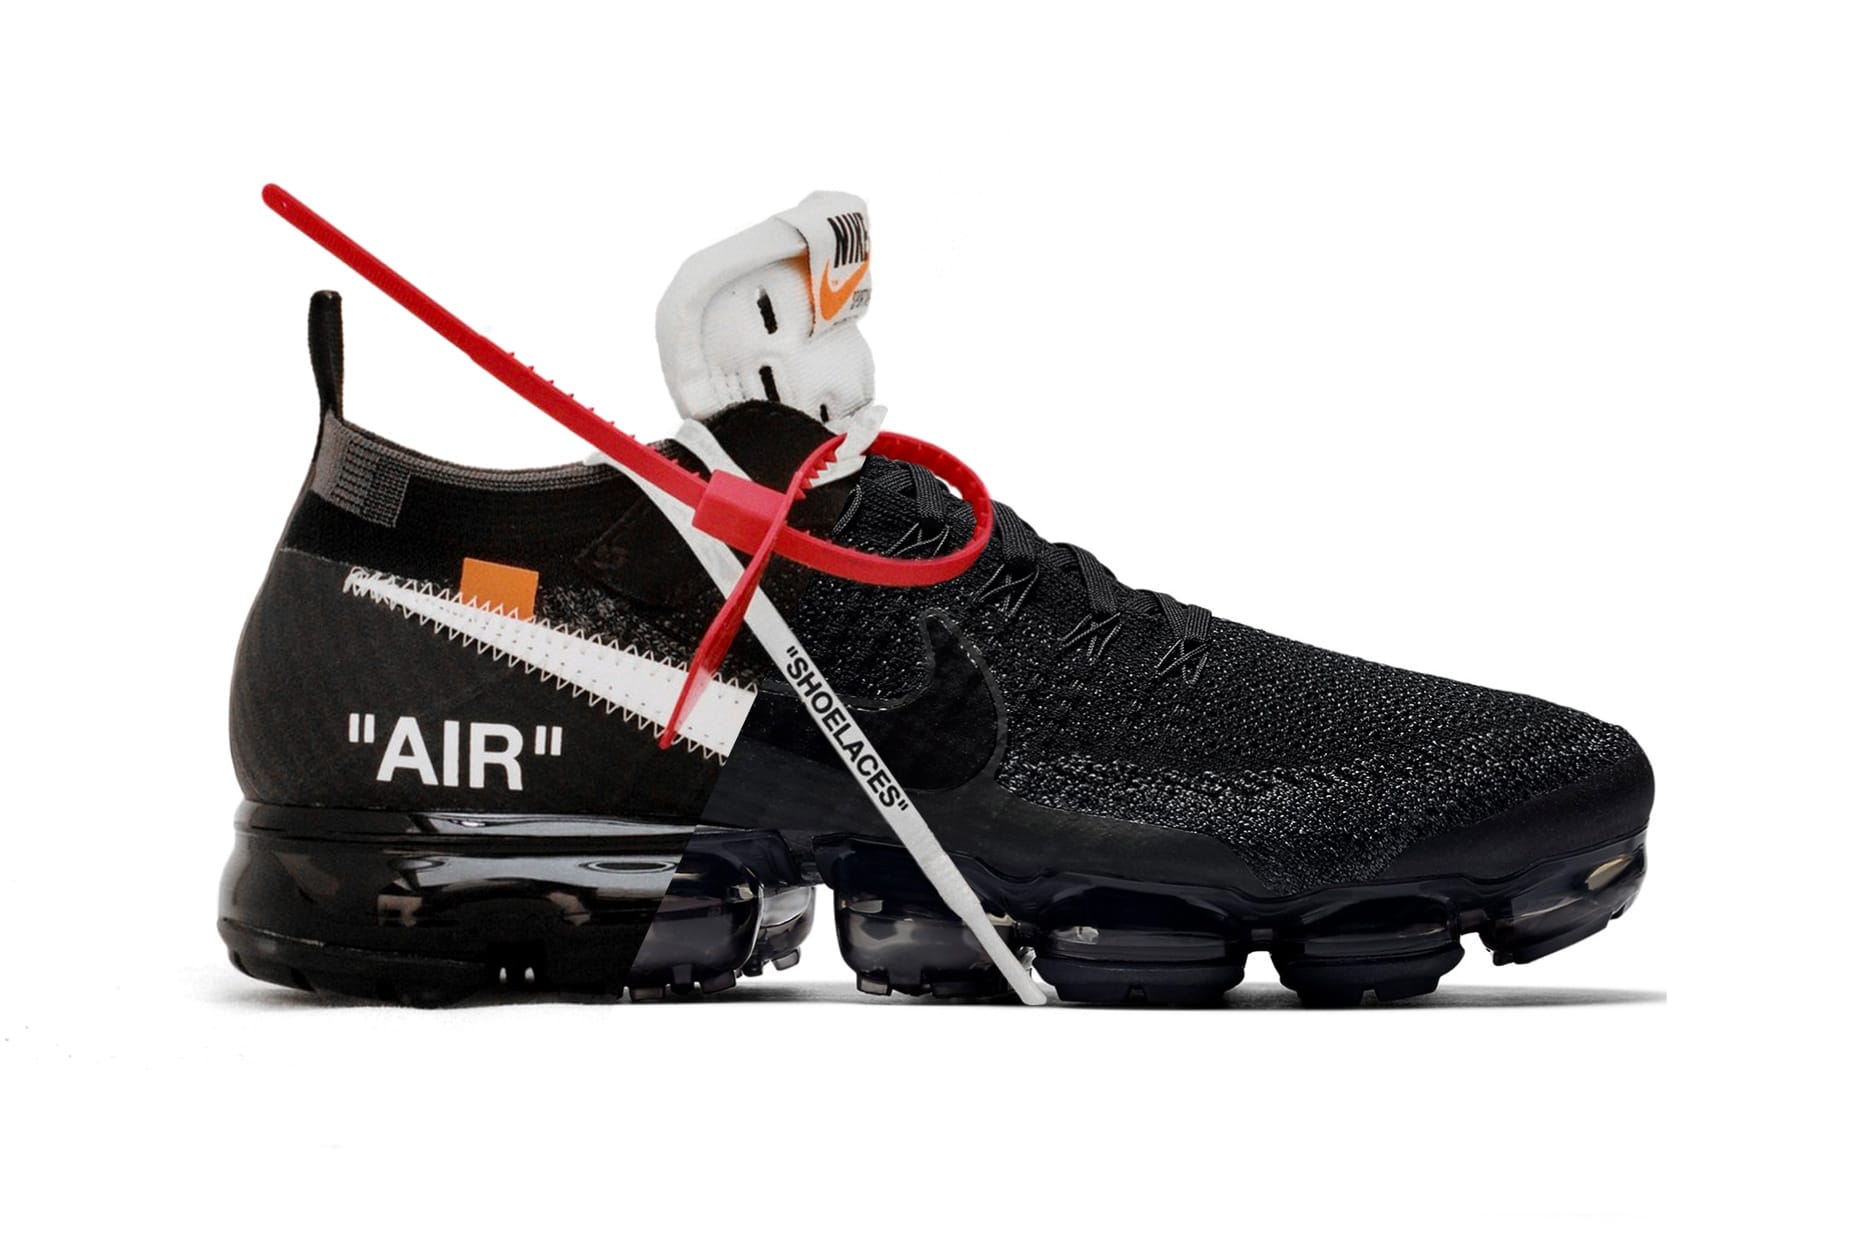 Off-White™ x Nike Sneakers Compared to Originals | Hypebeast